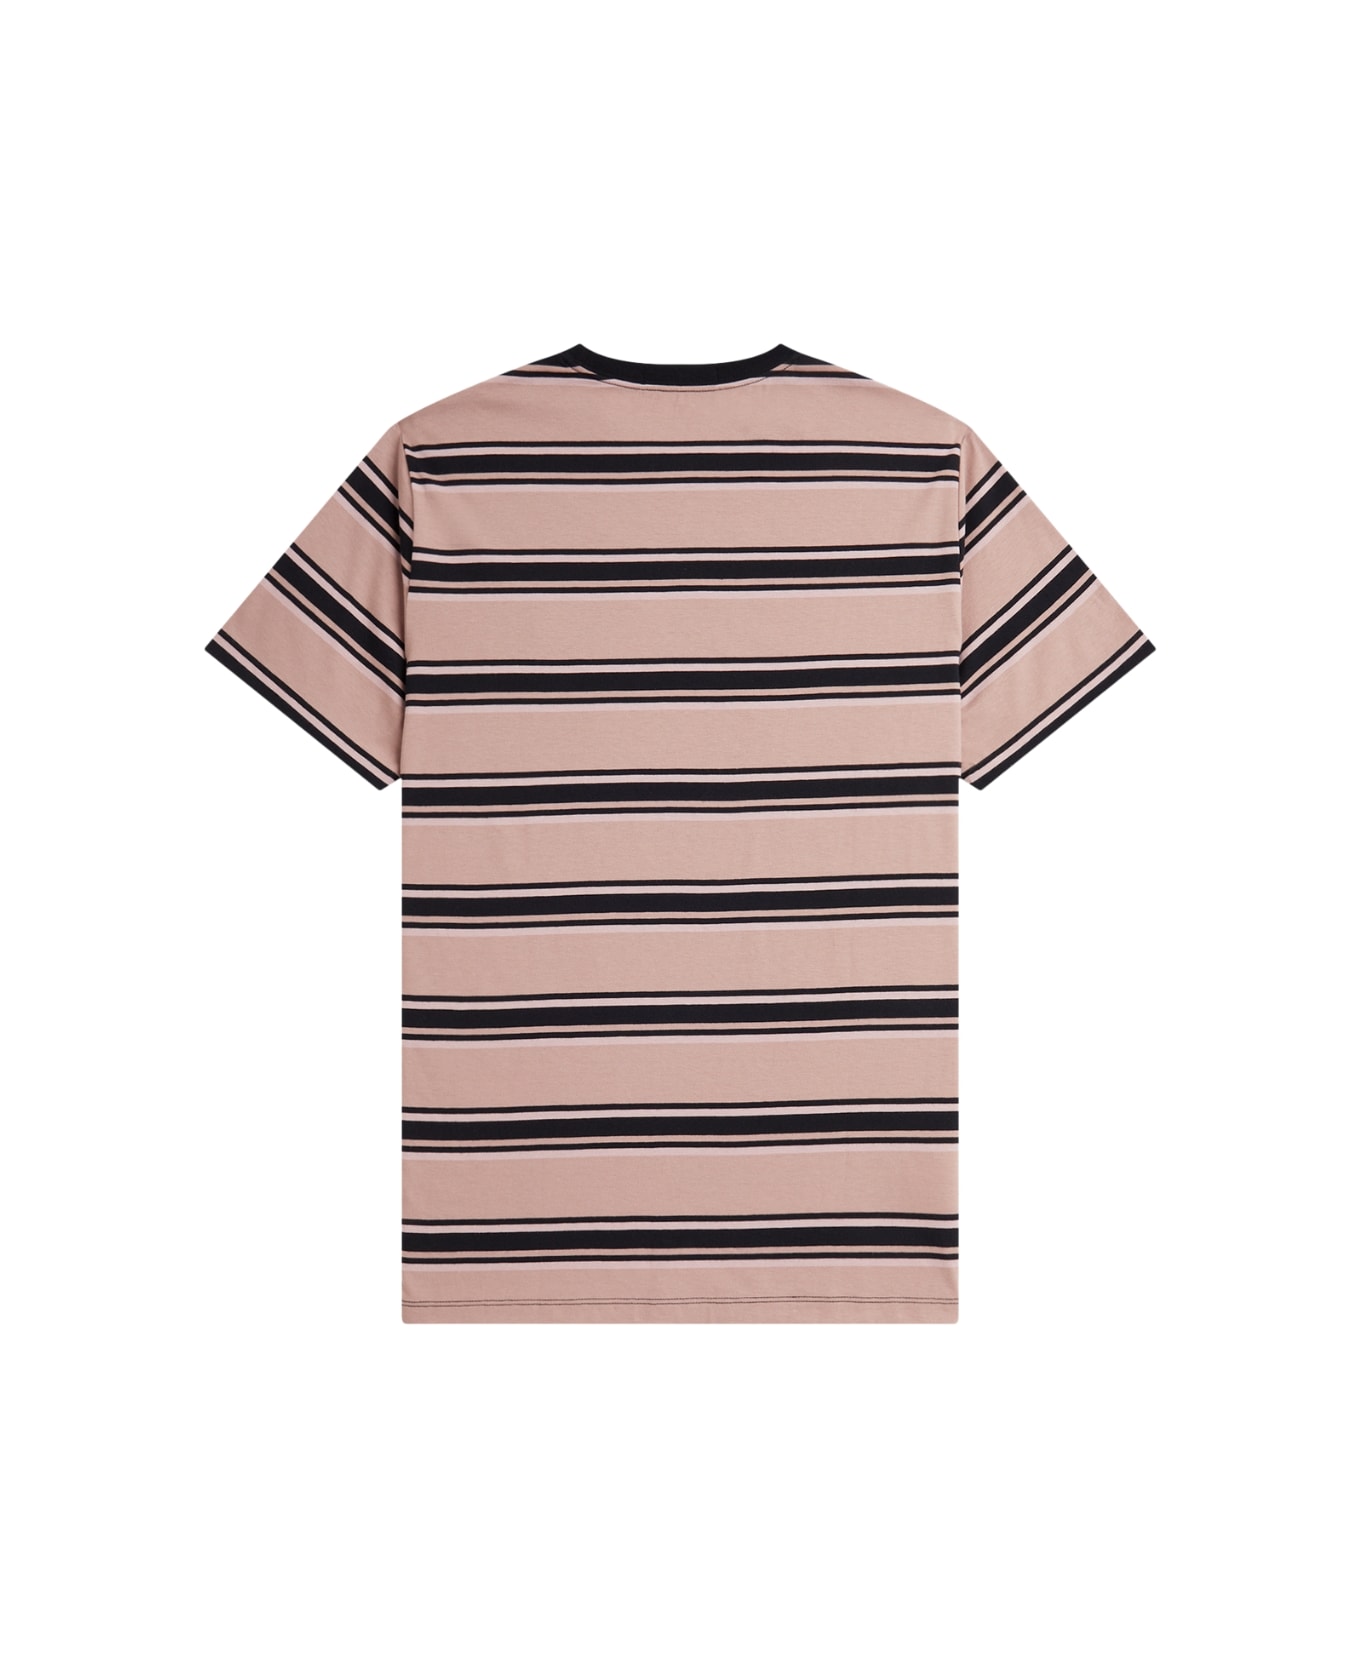 Fred Perry Fp Stripe T-shirt - Dkpink Dustro Bk